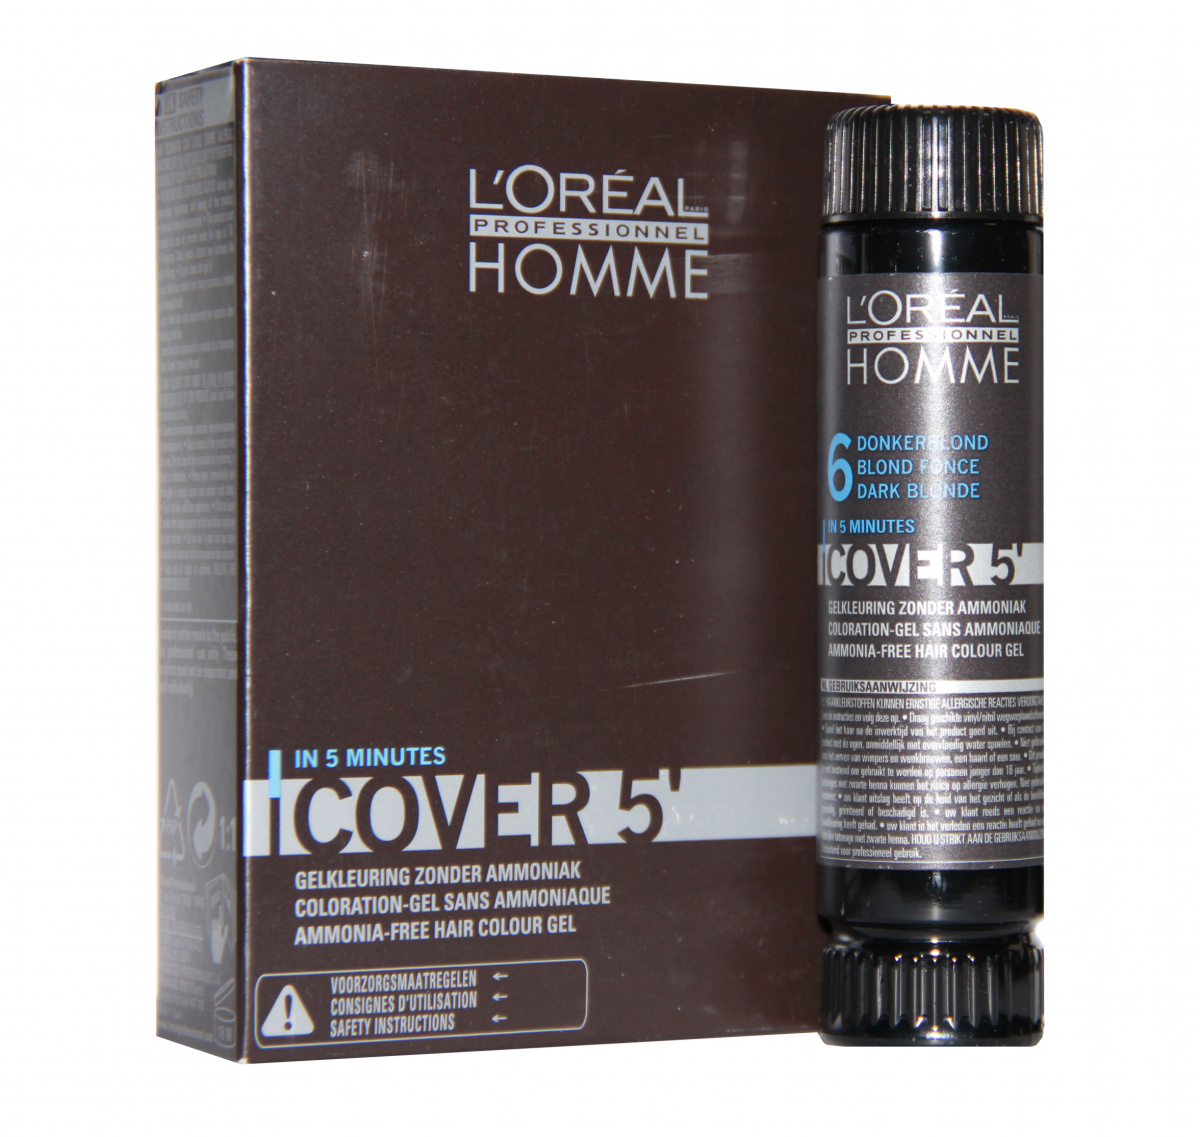 L oreal homme. L'Oreal Professionnel homme Cover 5 № 6. Тонирующий гель homme Cover 5 №6. L'Oreal Professionnel homme Cover 5 №5. Loreal Professionnel homme Cover 5 № 3 50мл.